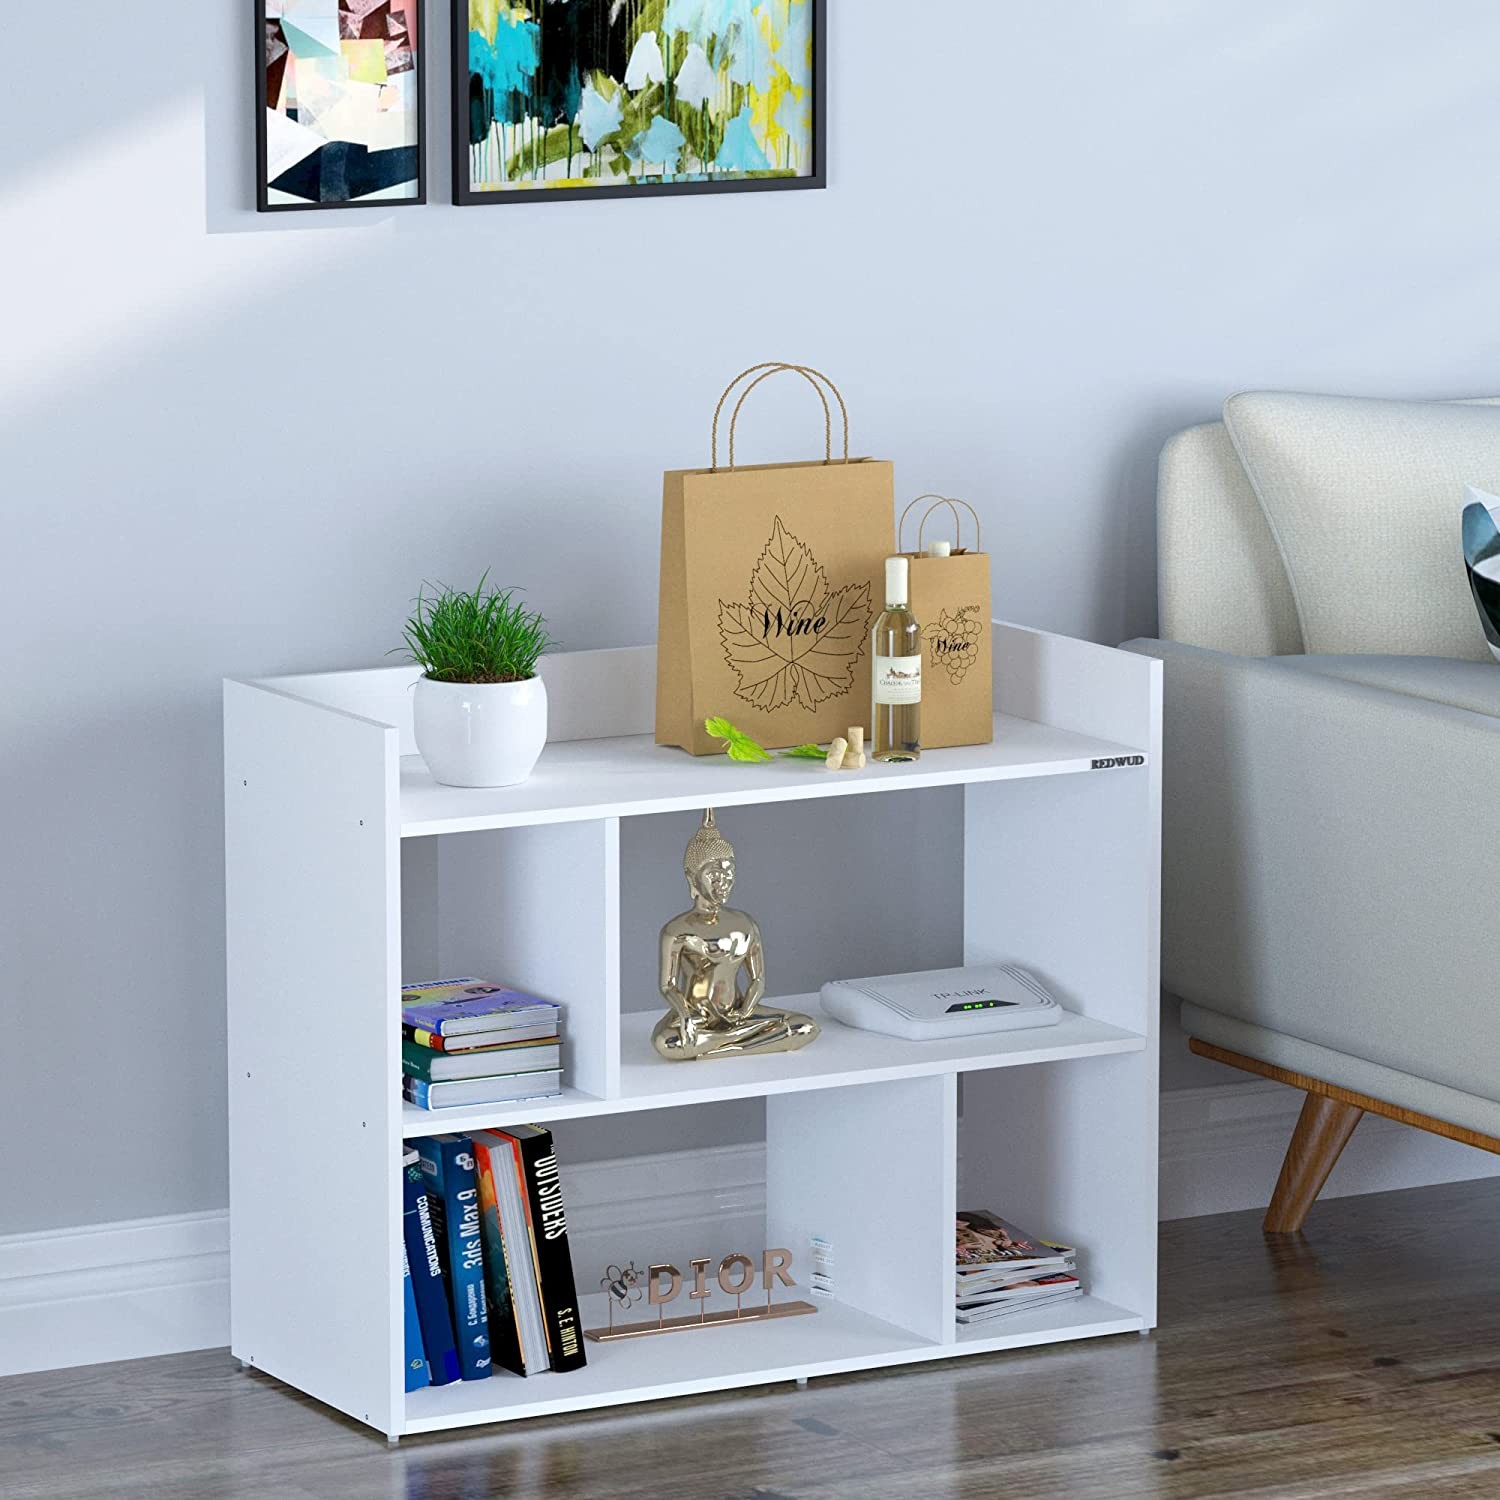 sally-engineered-wood-bedside-table-end-table-white-rd-sally-wt